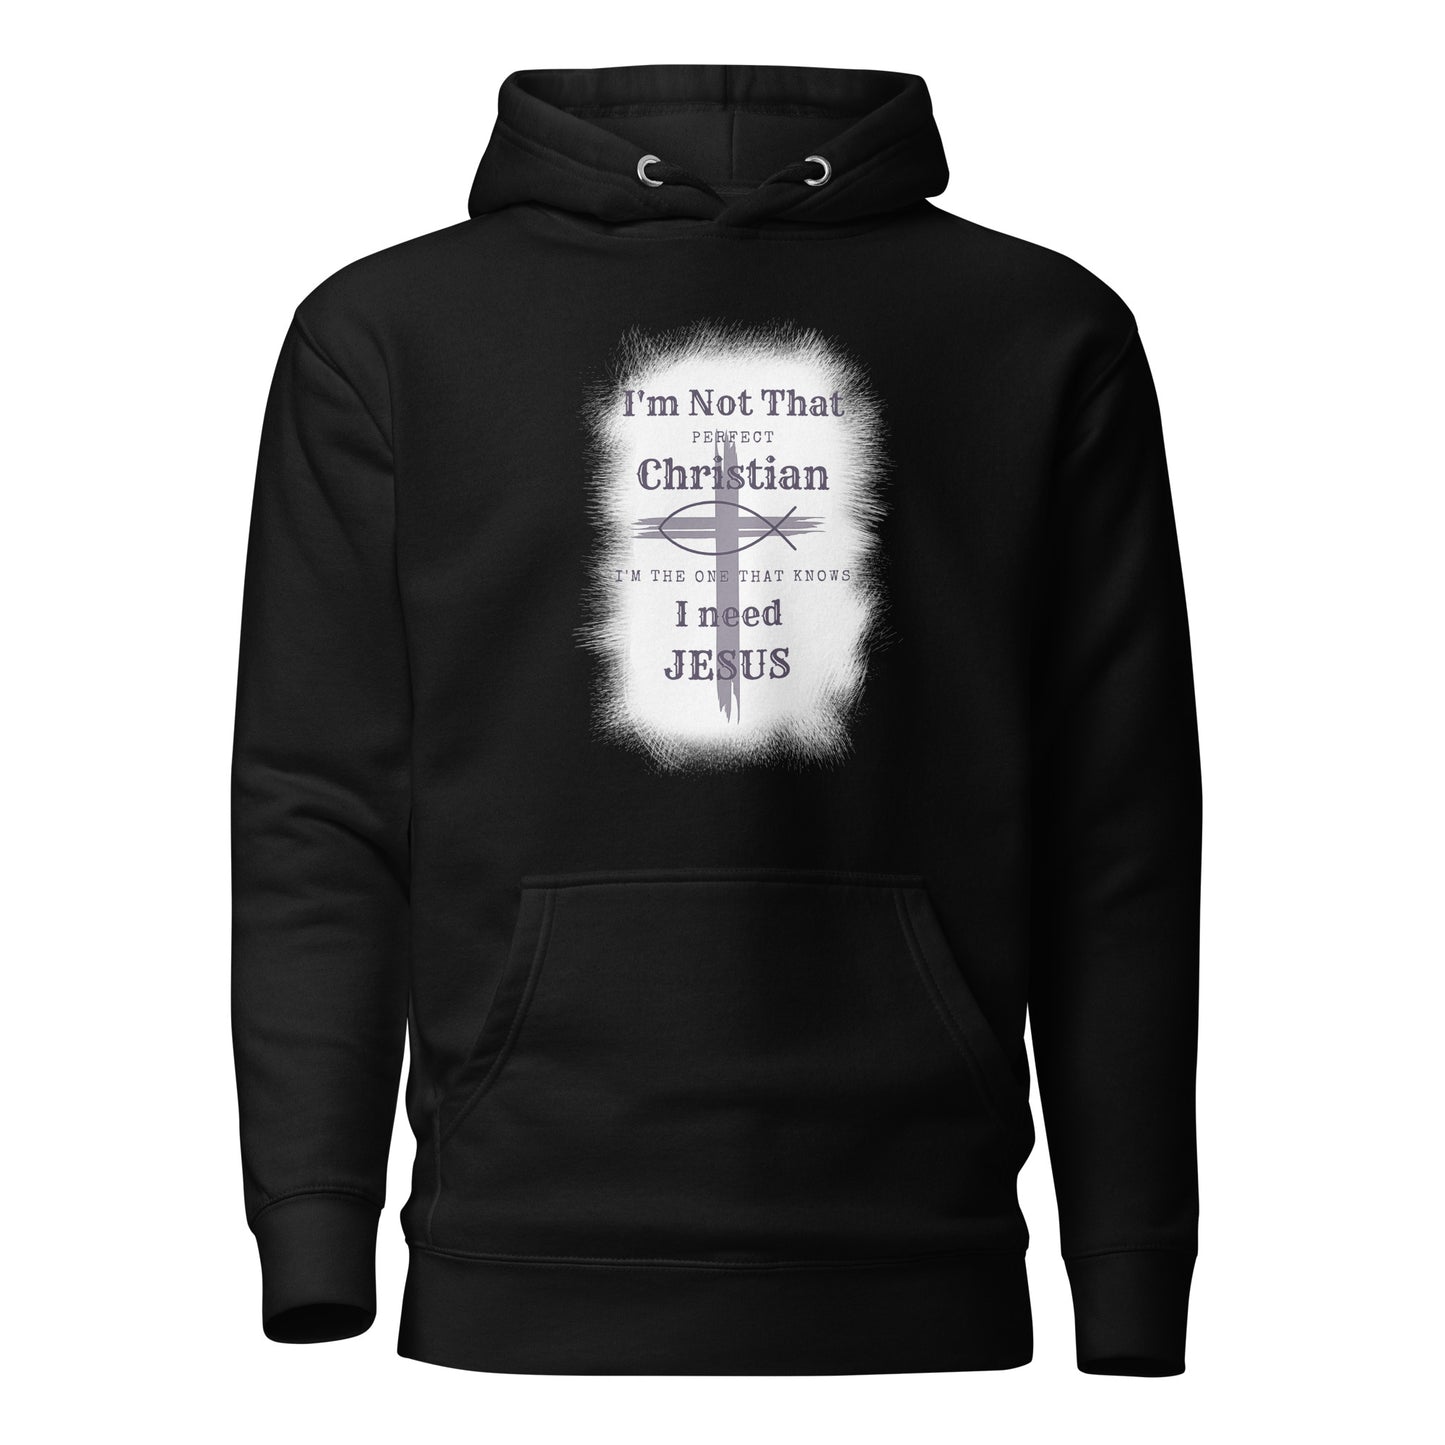 I'm Not That Perfect Christian Hoodie